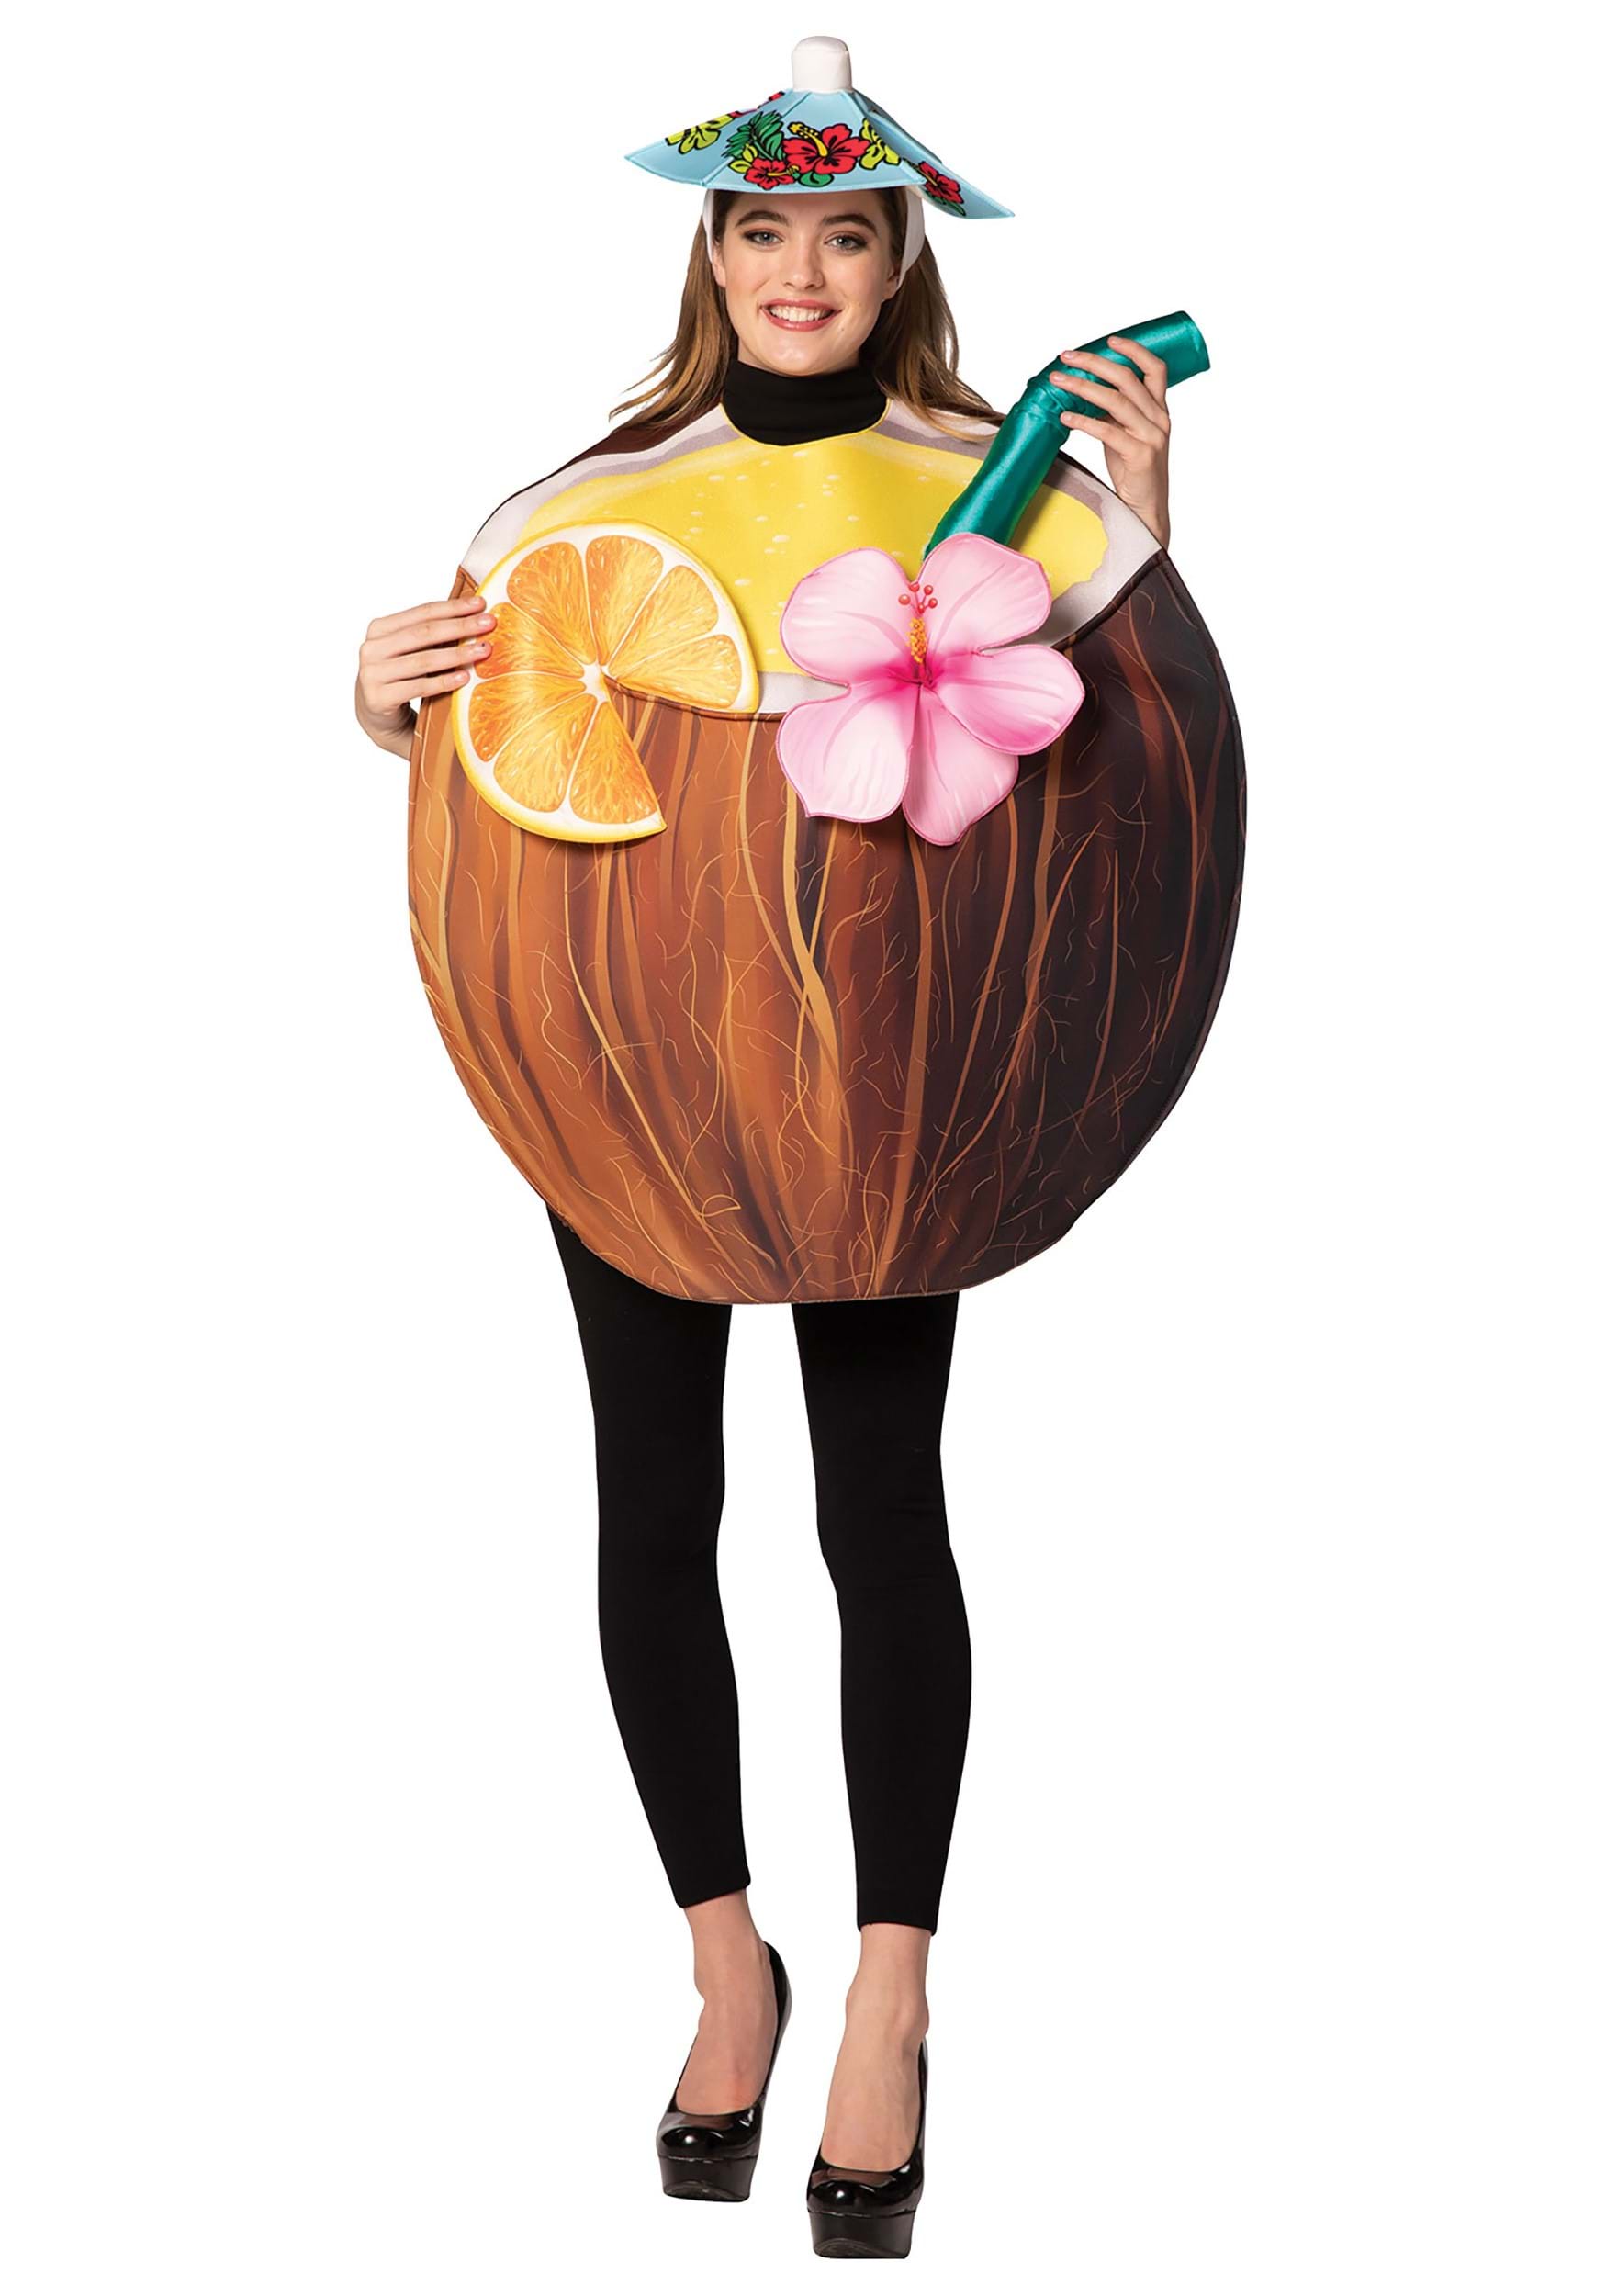 22.) Coconut Cocktail Drink Adult Costume